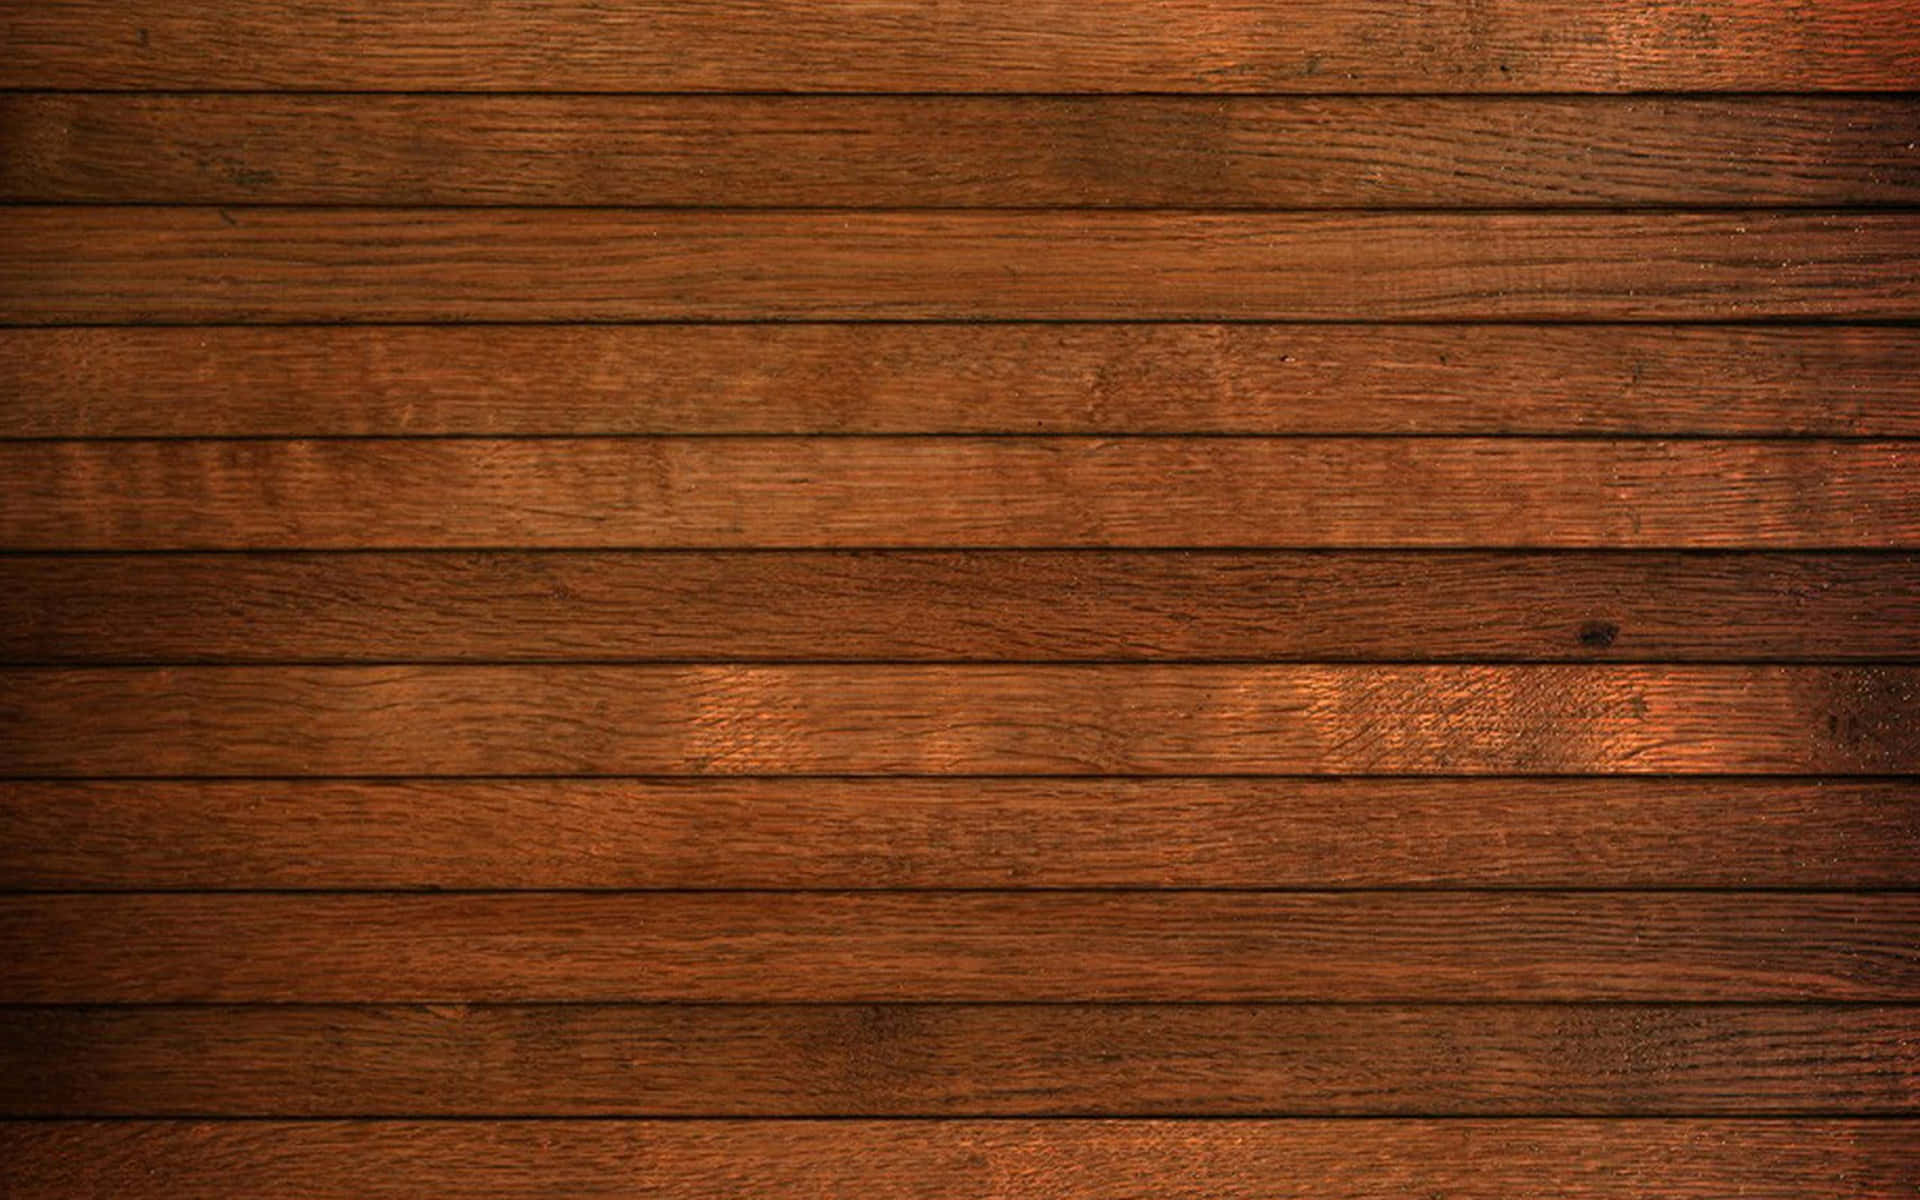 Smooth Planks Wooden Background Texture